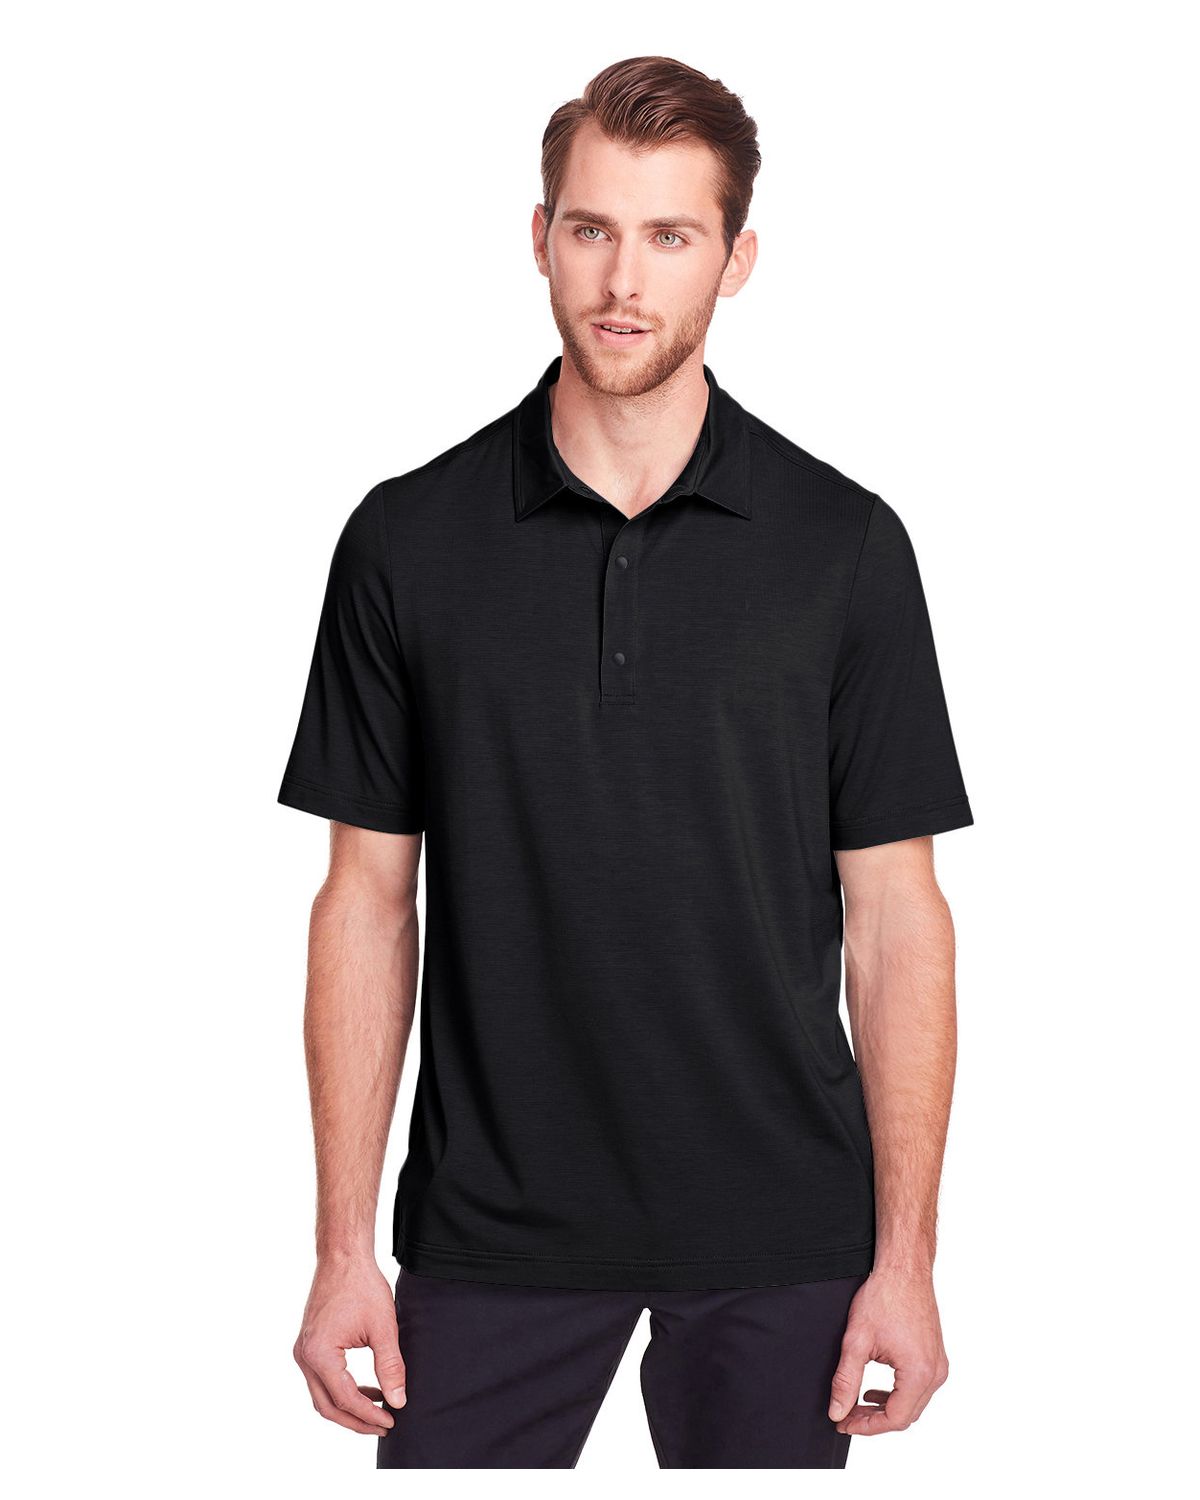 'North End NE100 Men's Jaq Snap Up Stretch Performance Polo'